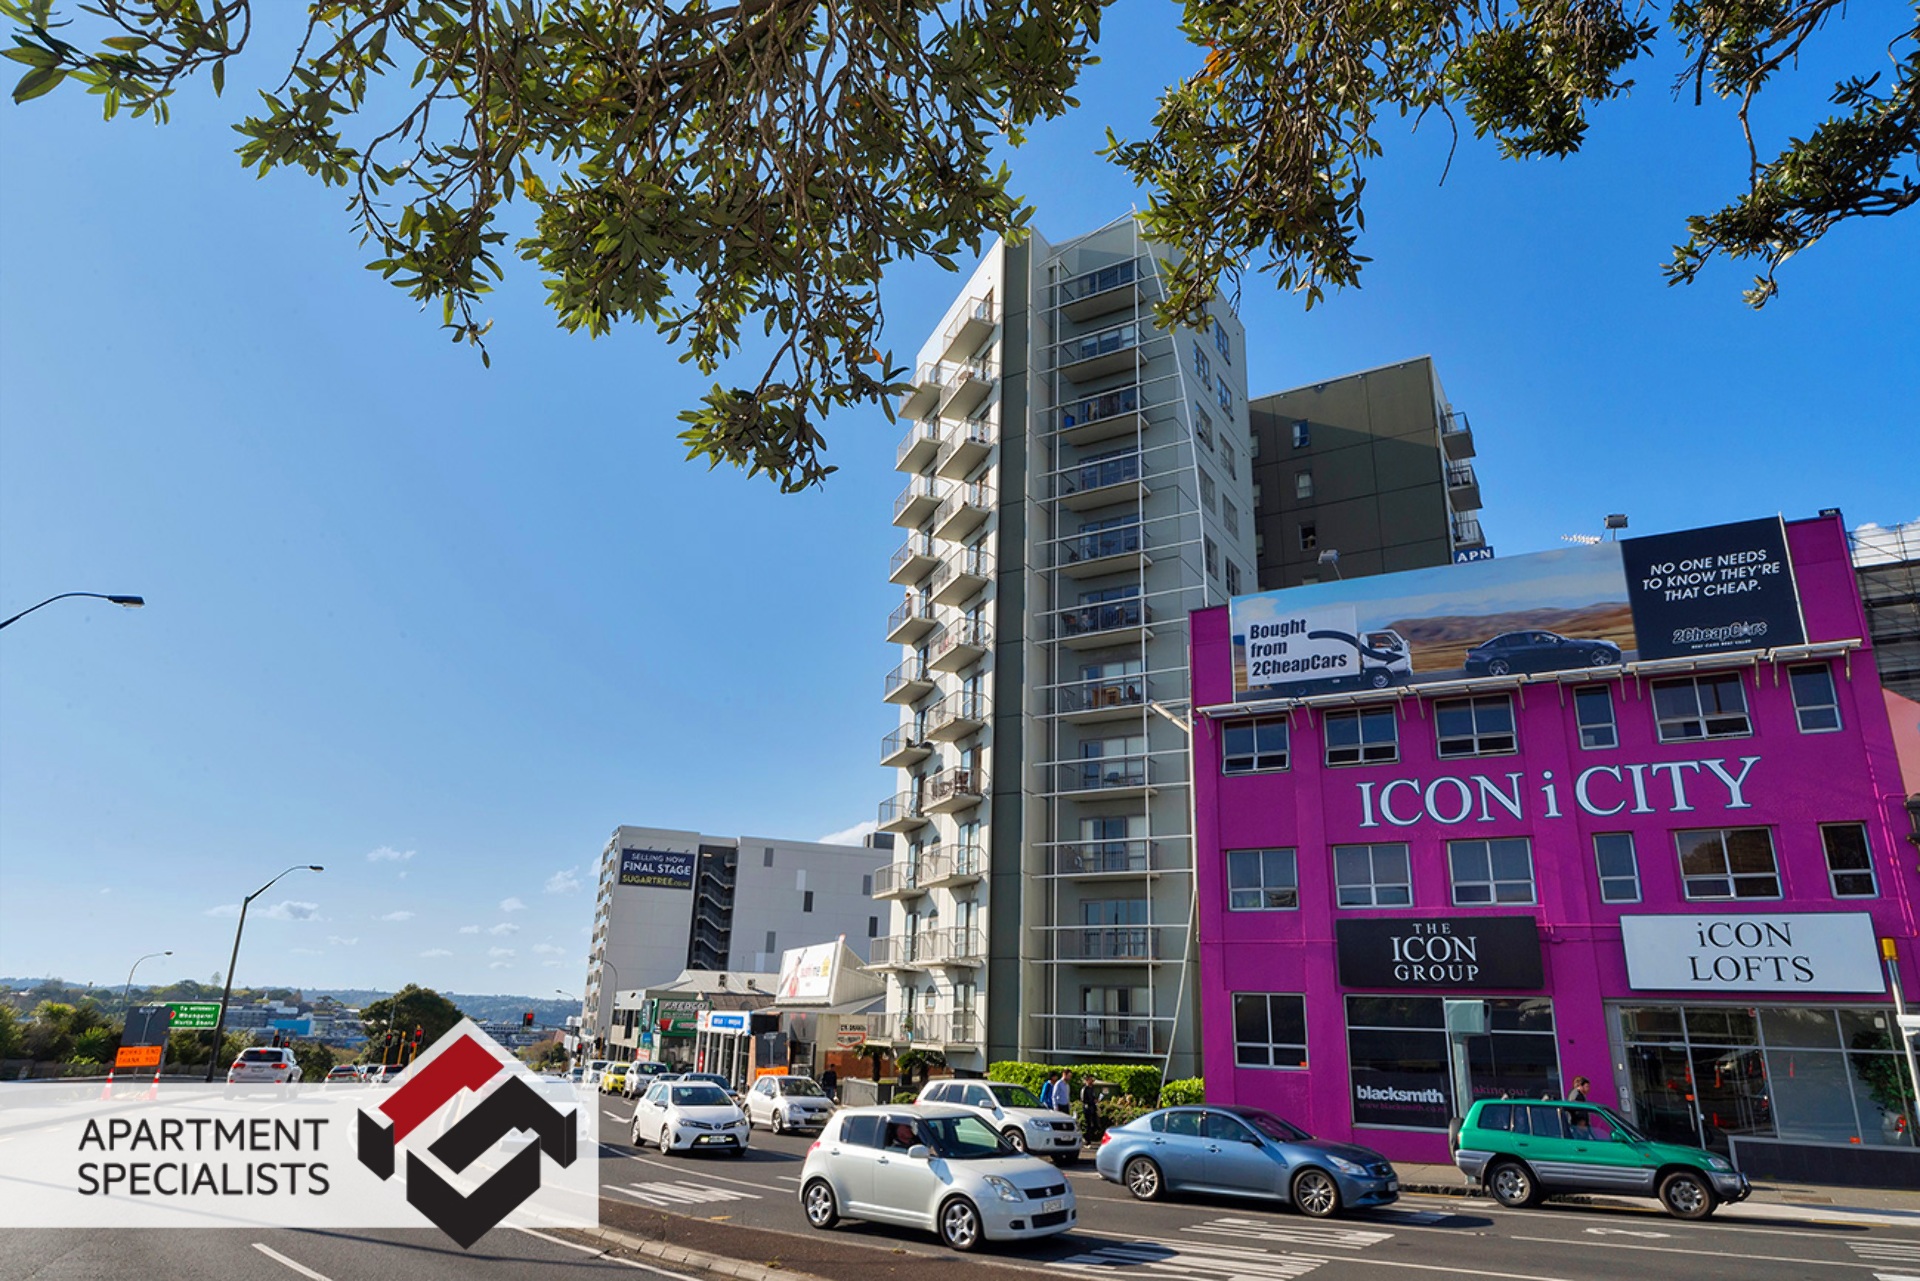 10 | 11 Union Street, CENTRAL AUCKLAND | Apartment Specialists